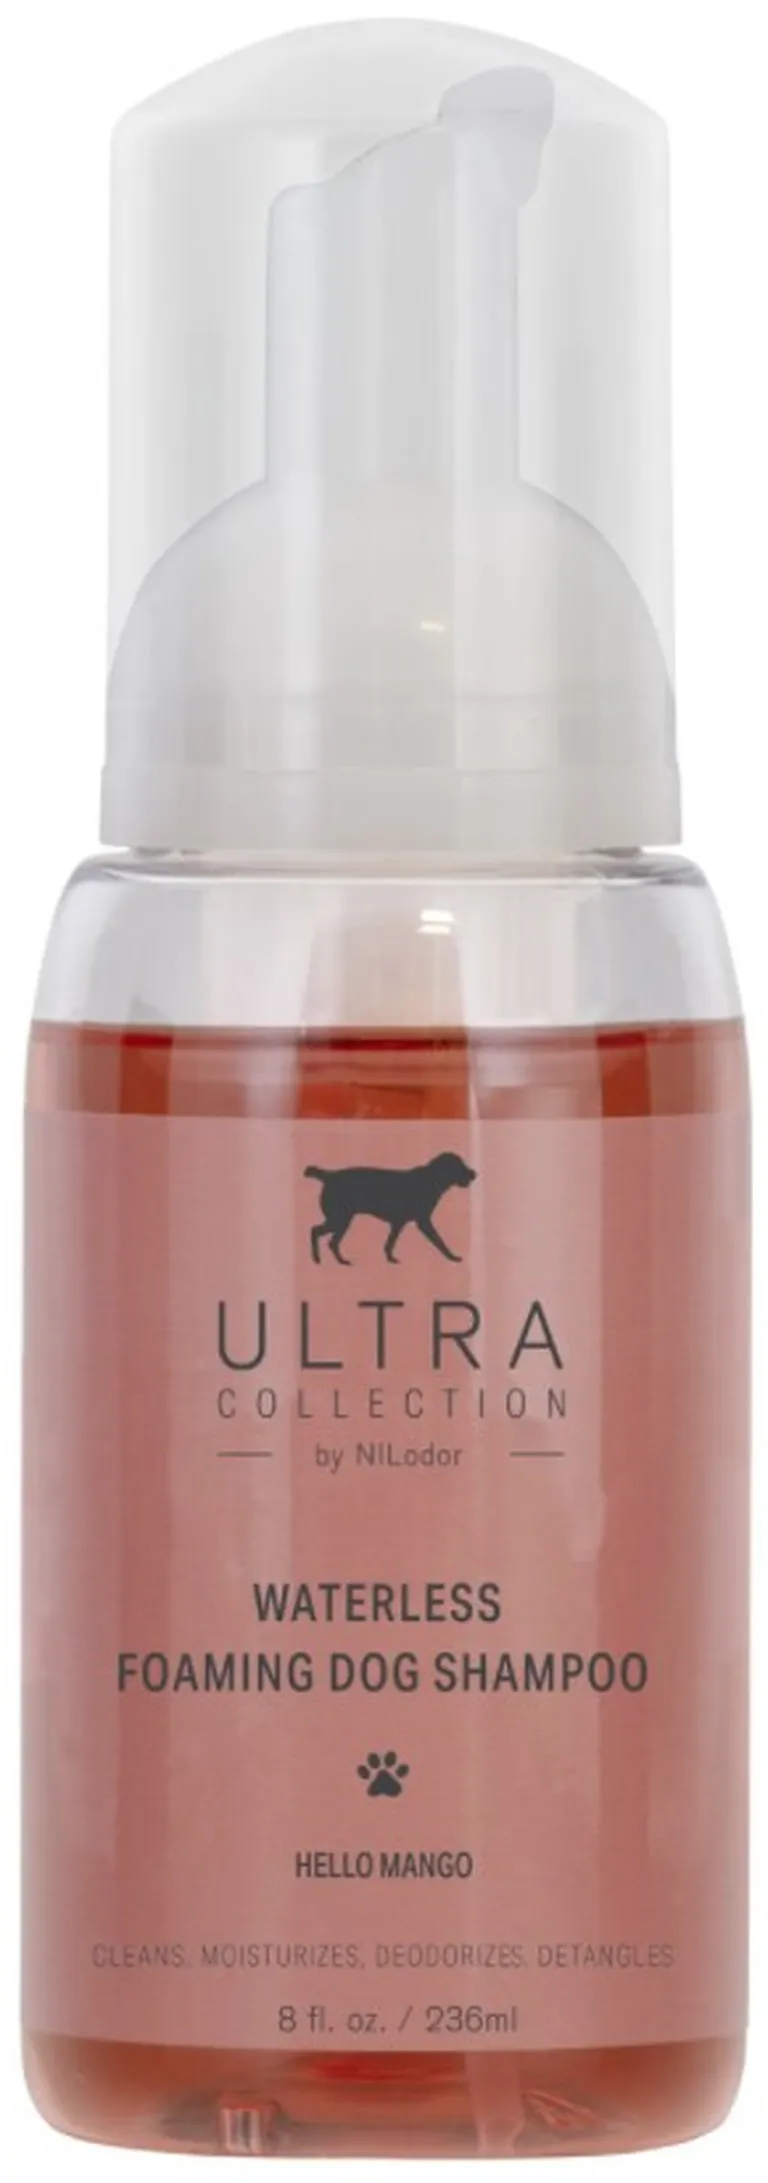 Nilodor Ultra Collection Waterless Foaming Shampoo for Dogs Mango Scent Photo 1